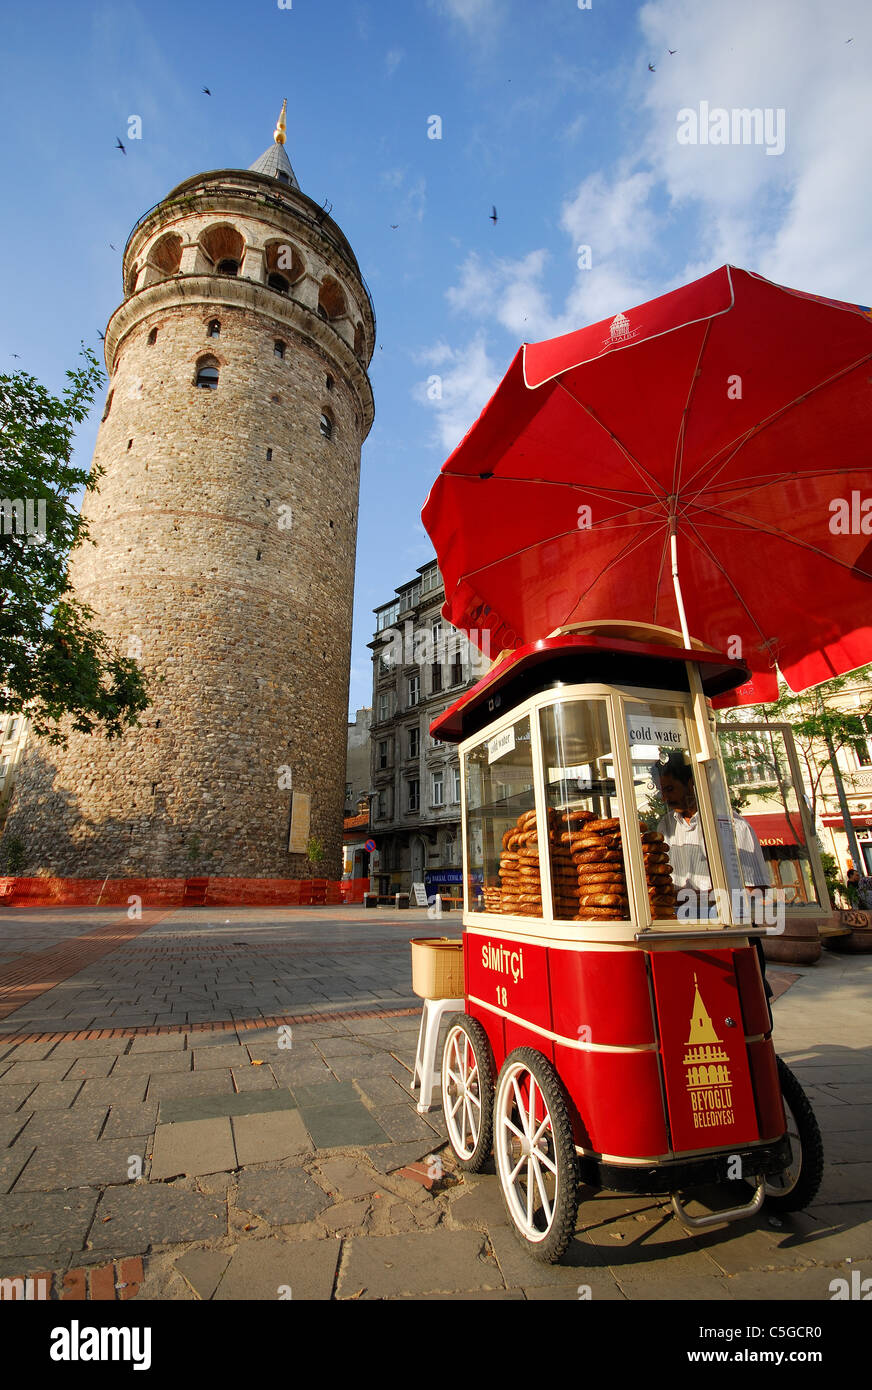 ISTANBUL, TURKEY. A cart selling simits (sesame-covered bread rings) by the Galata Tower in Beyoglu district. 2011. Stock Photo